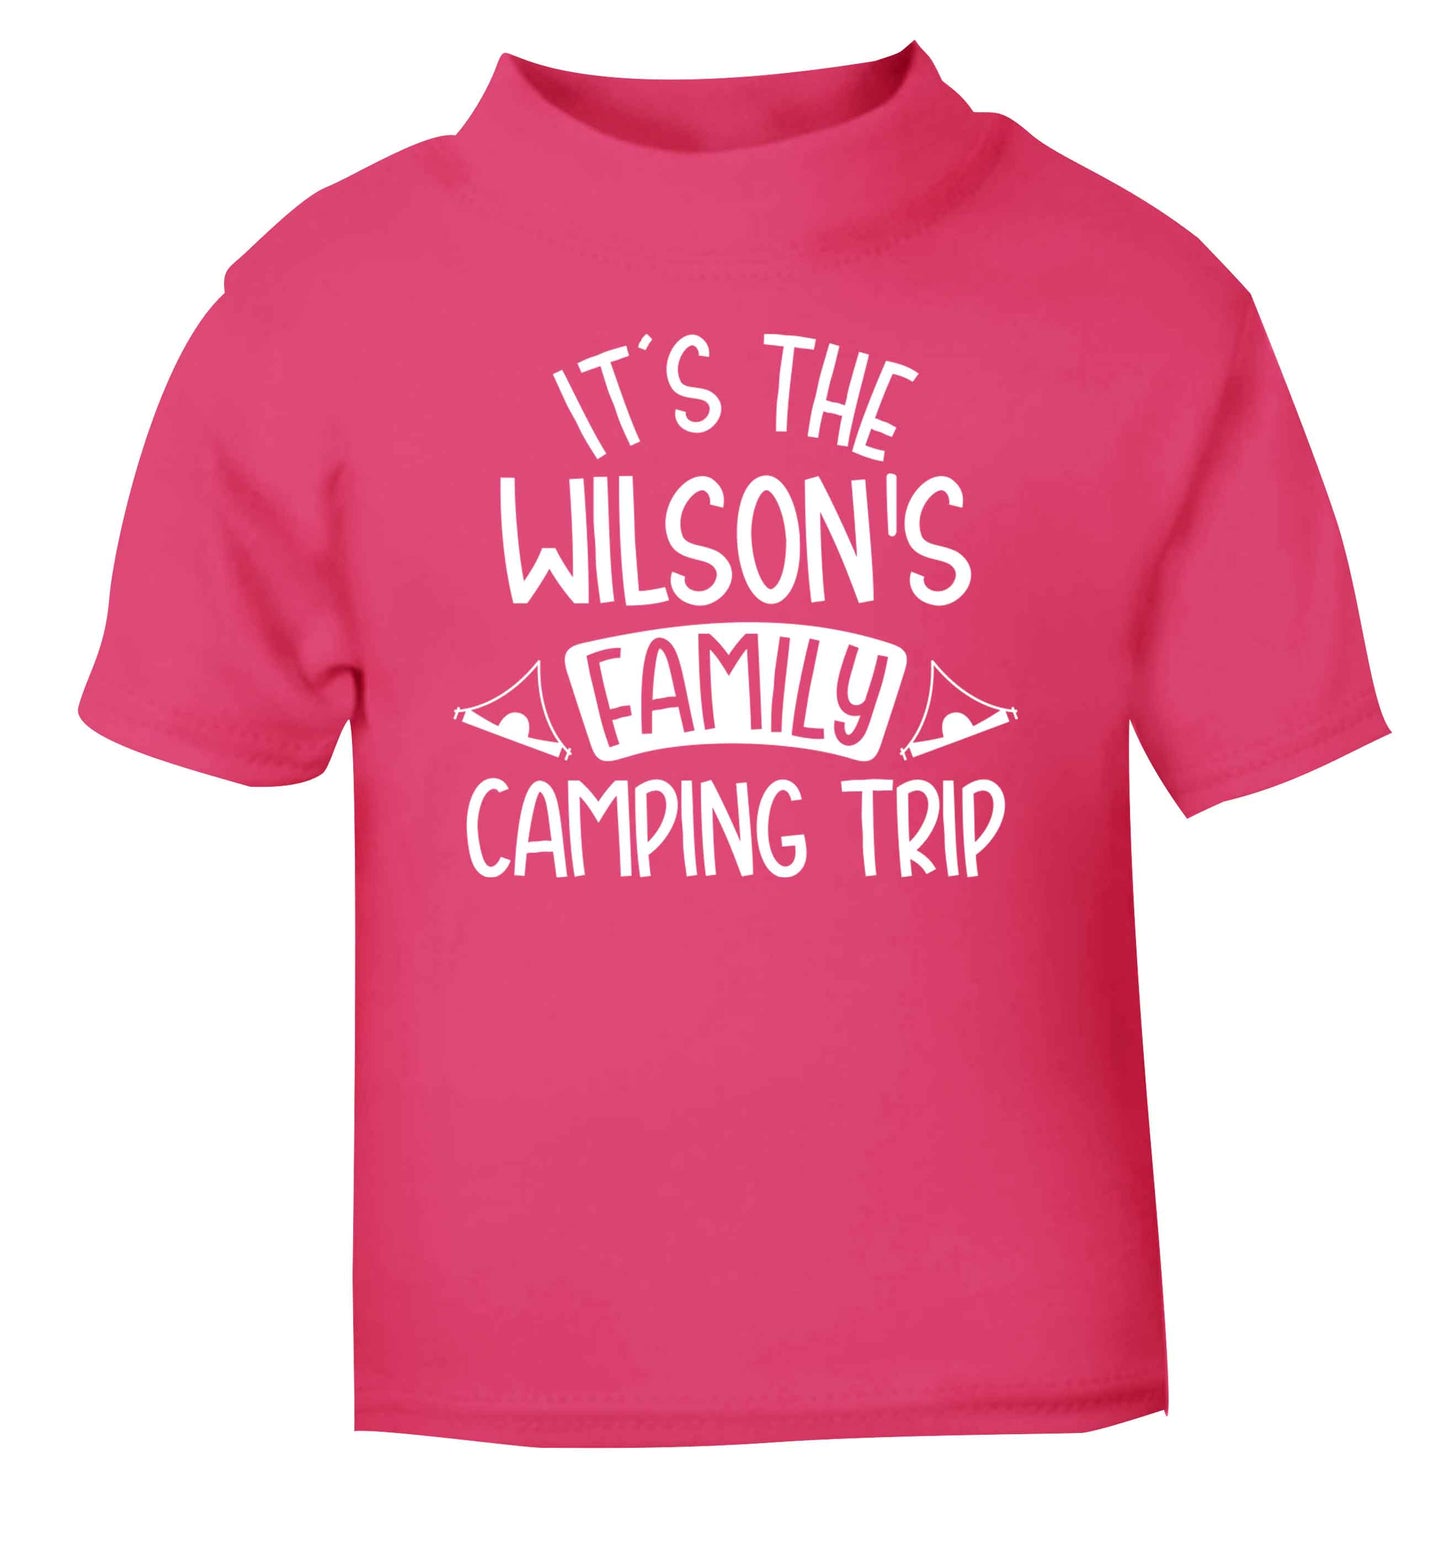 It's the Wilson's family camping trip personalised pink Baby Toddler Tshirt 2 Years